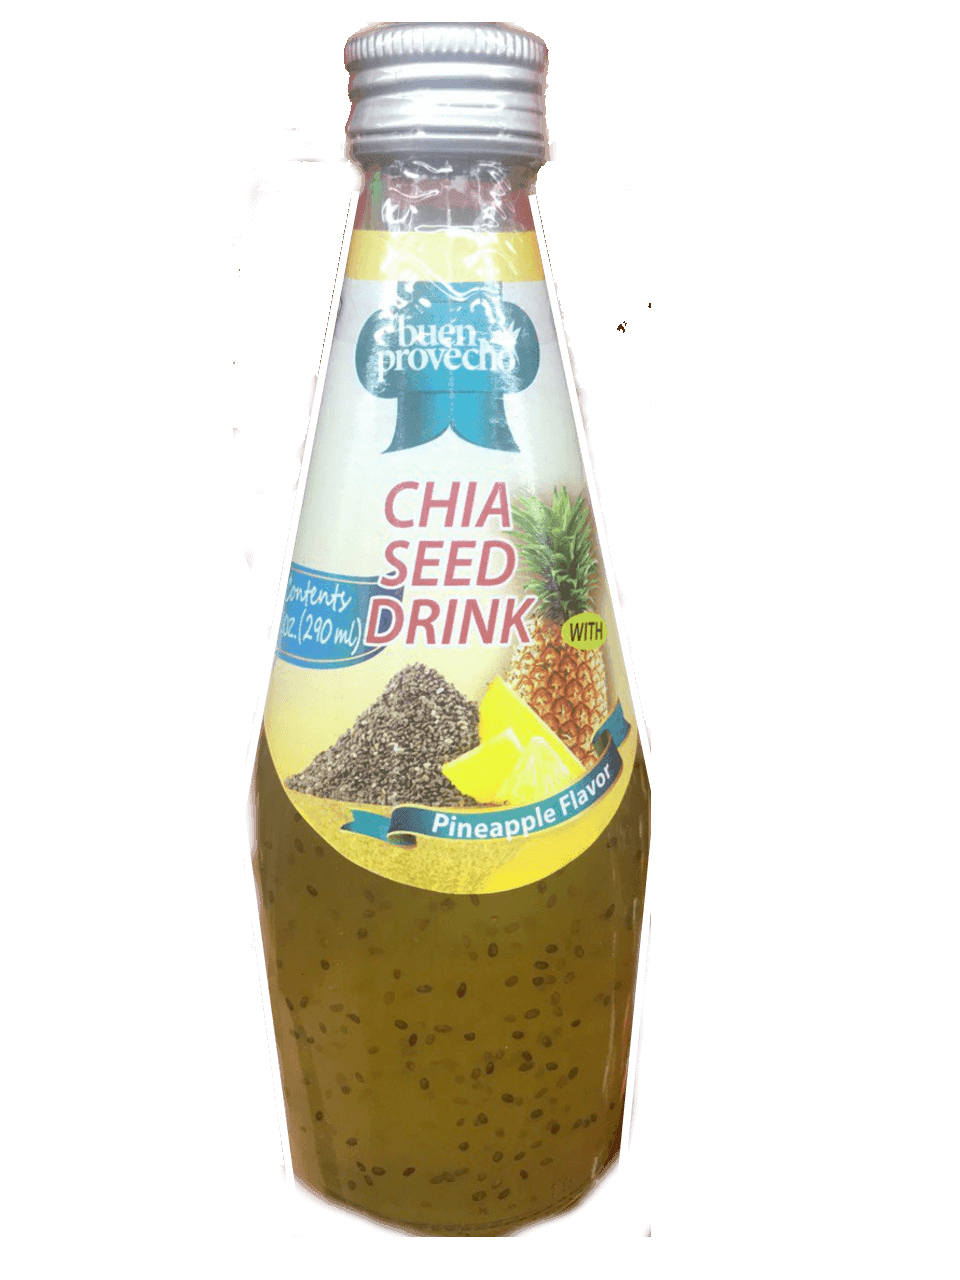 Buen Provecho - Chia Seed Drink with Pineapple 9.8 Fl. oz.